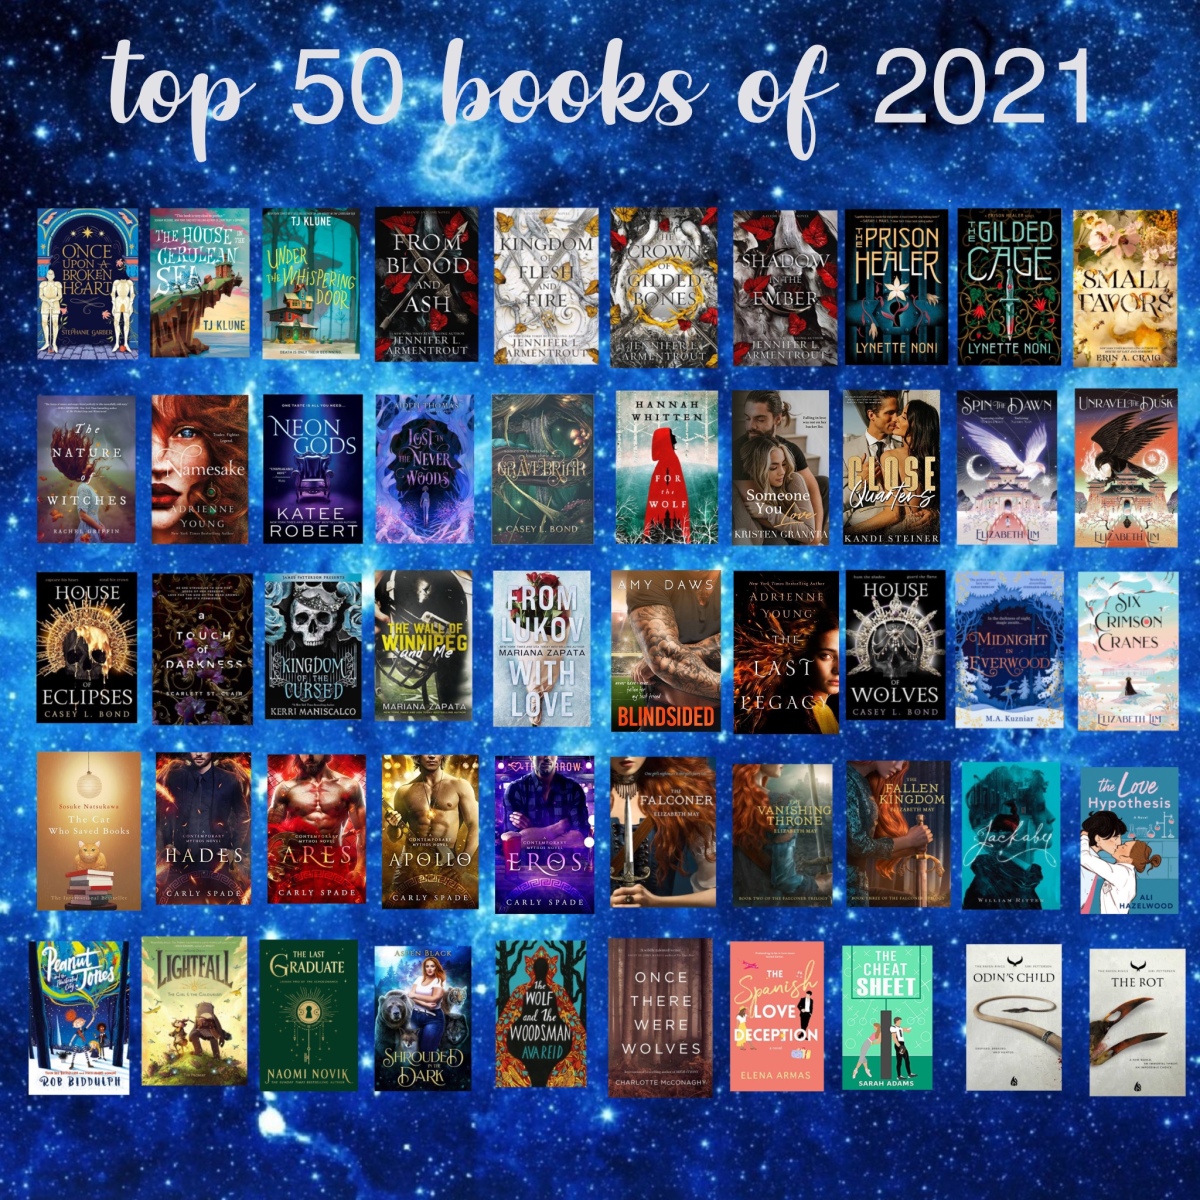 Top 50 books of 2021